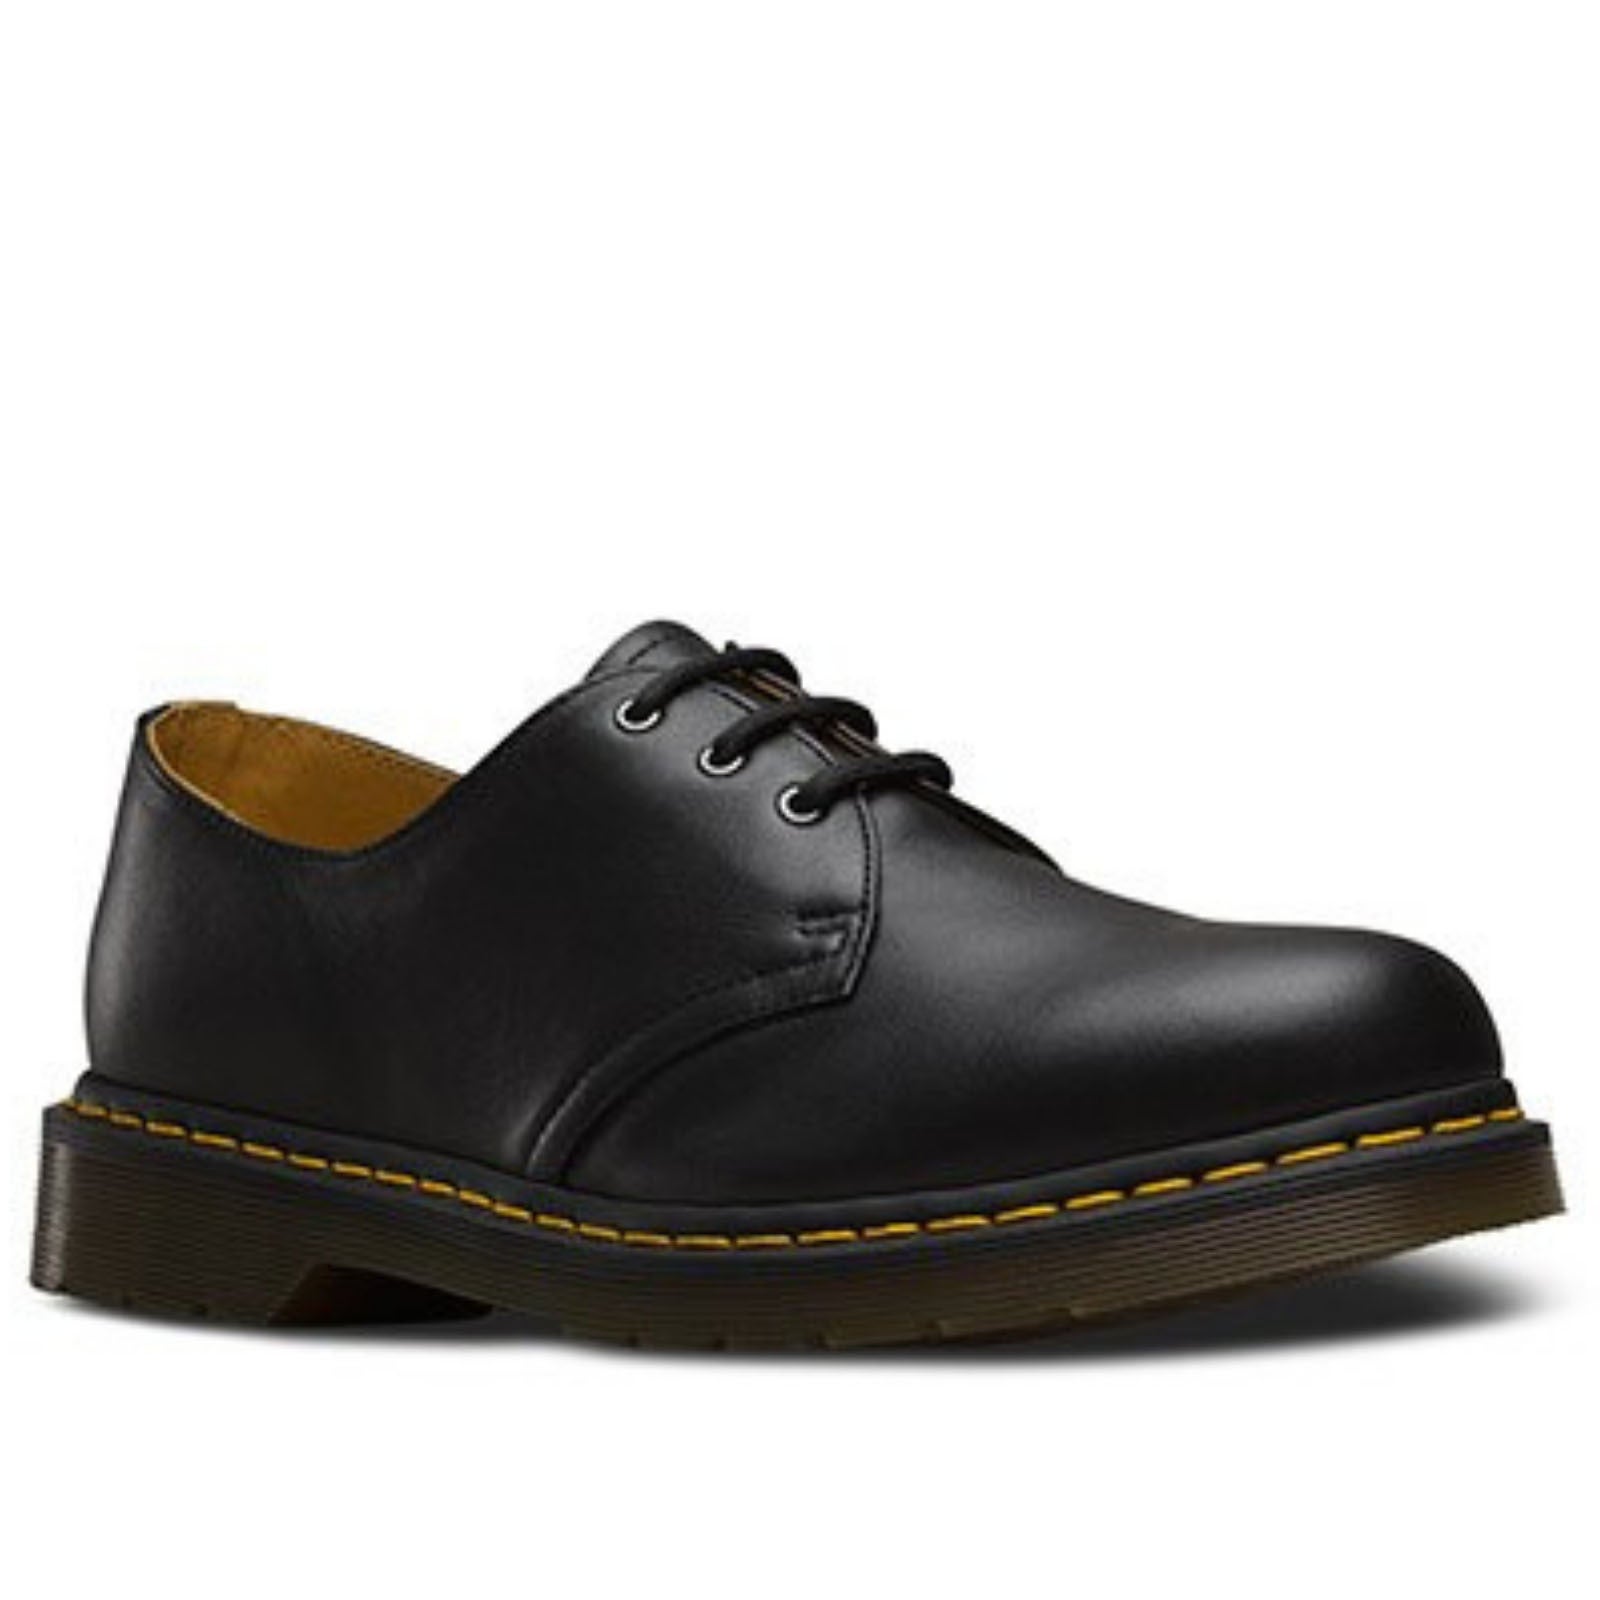 Dr. Martens 1461 Black Nappa Genuine Soft Leather Shoes 3 Eye Gibson ...